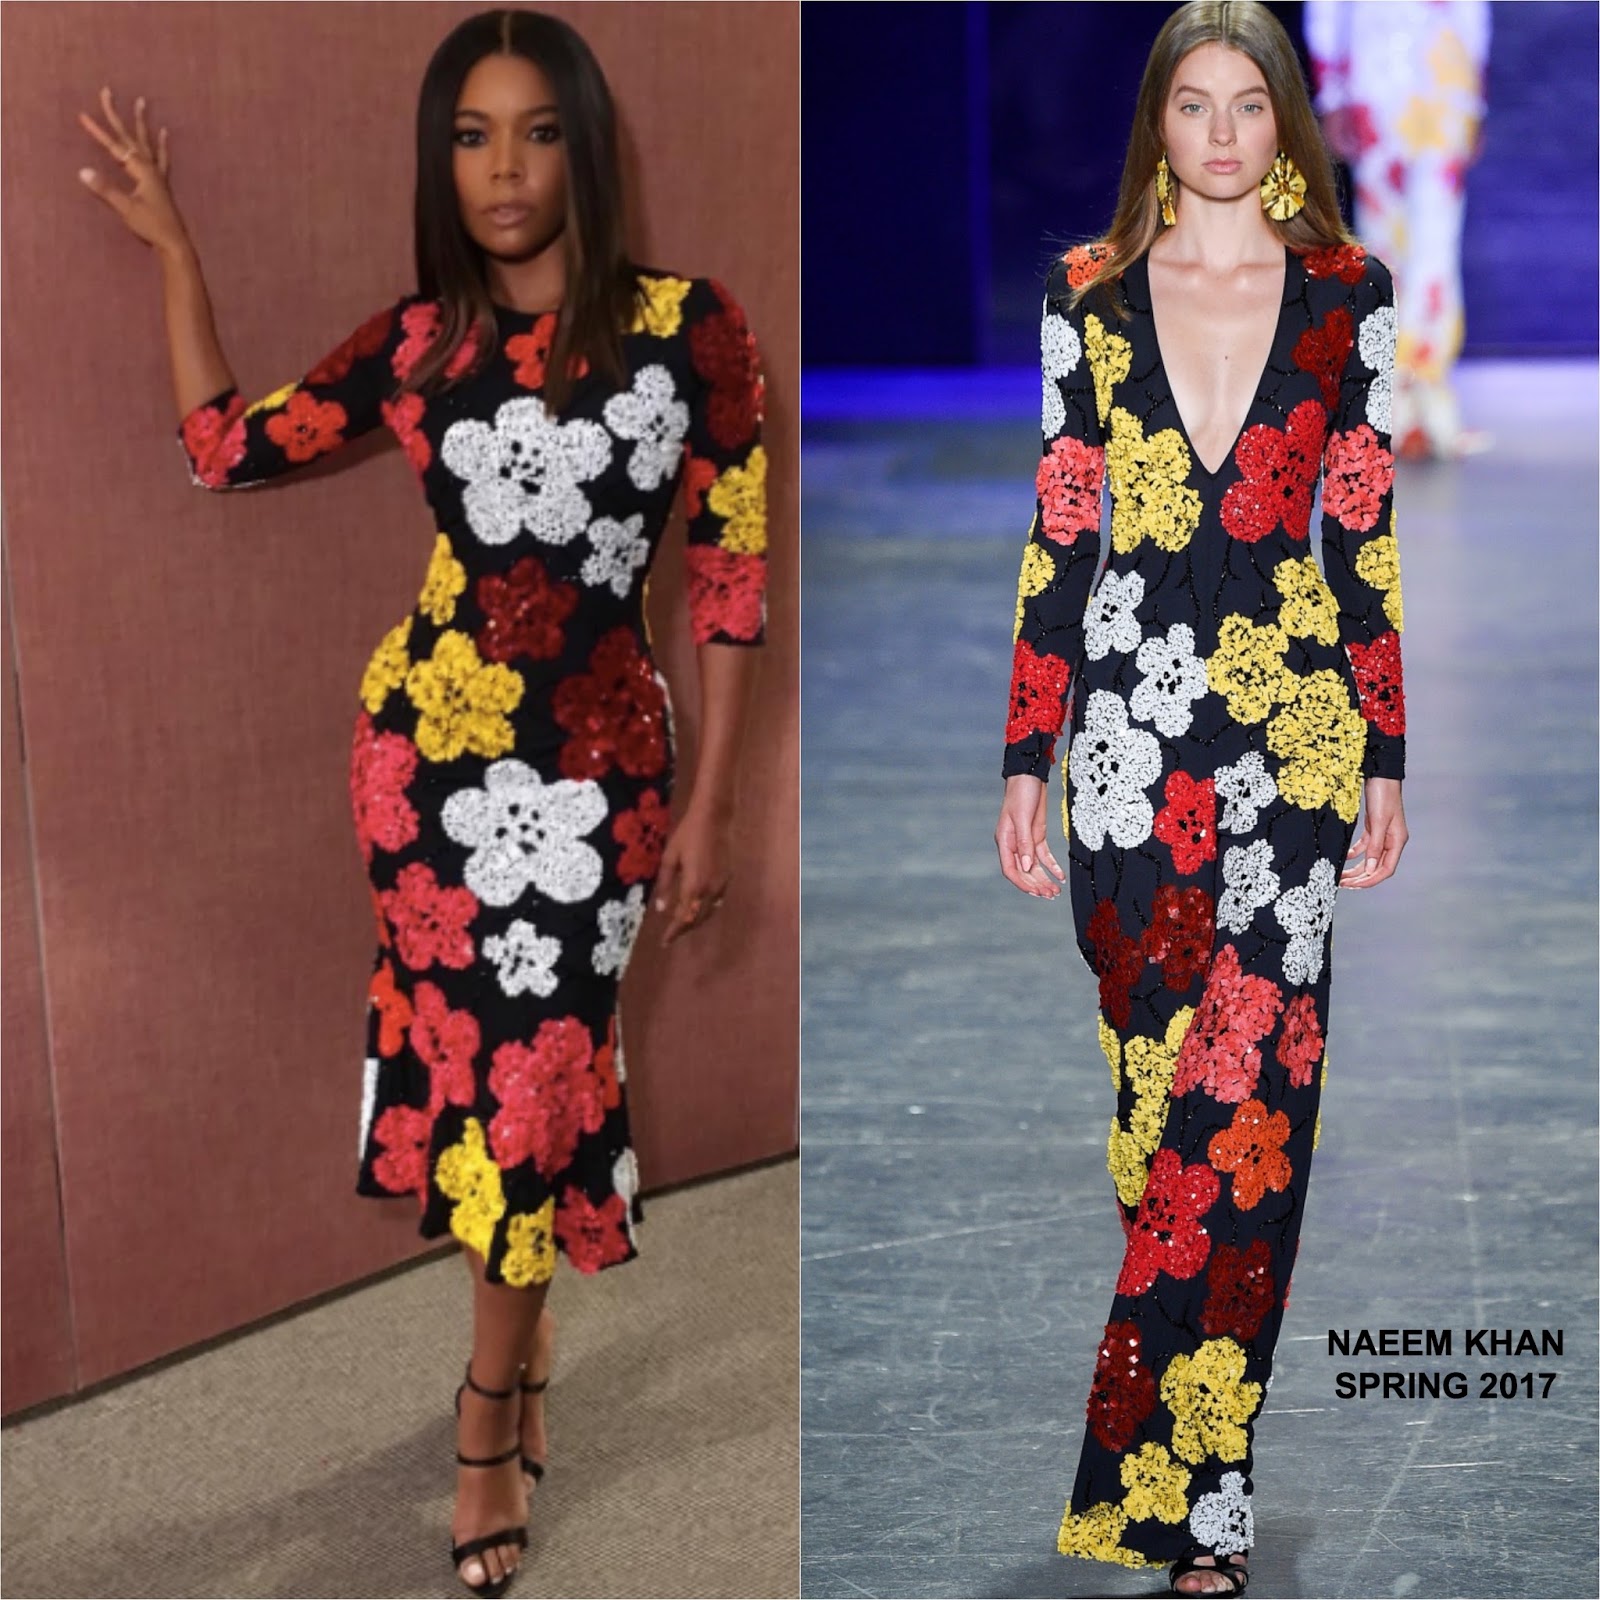 Gabrielle Union in Naeem Khan at the 'Being Mary Jane' NYC Premiere